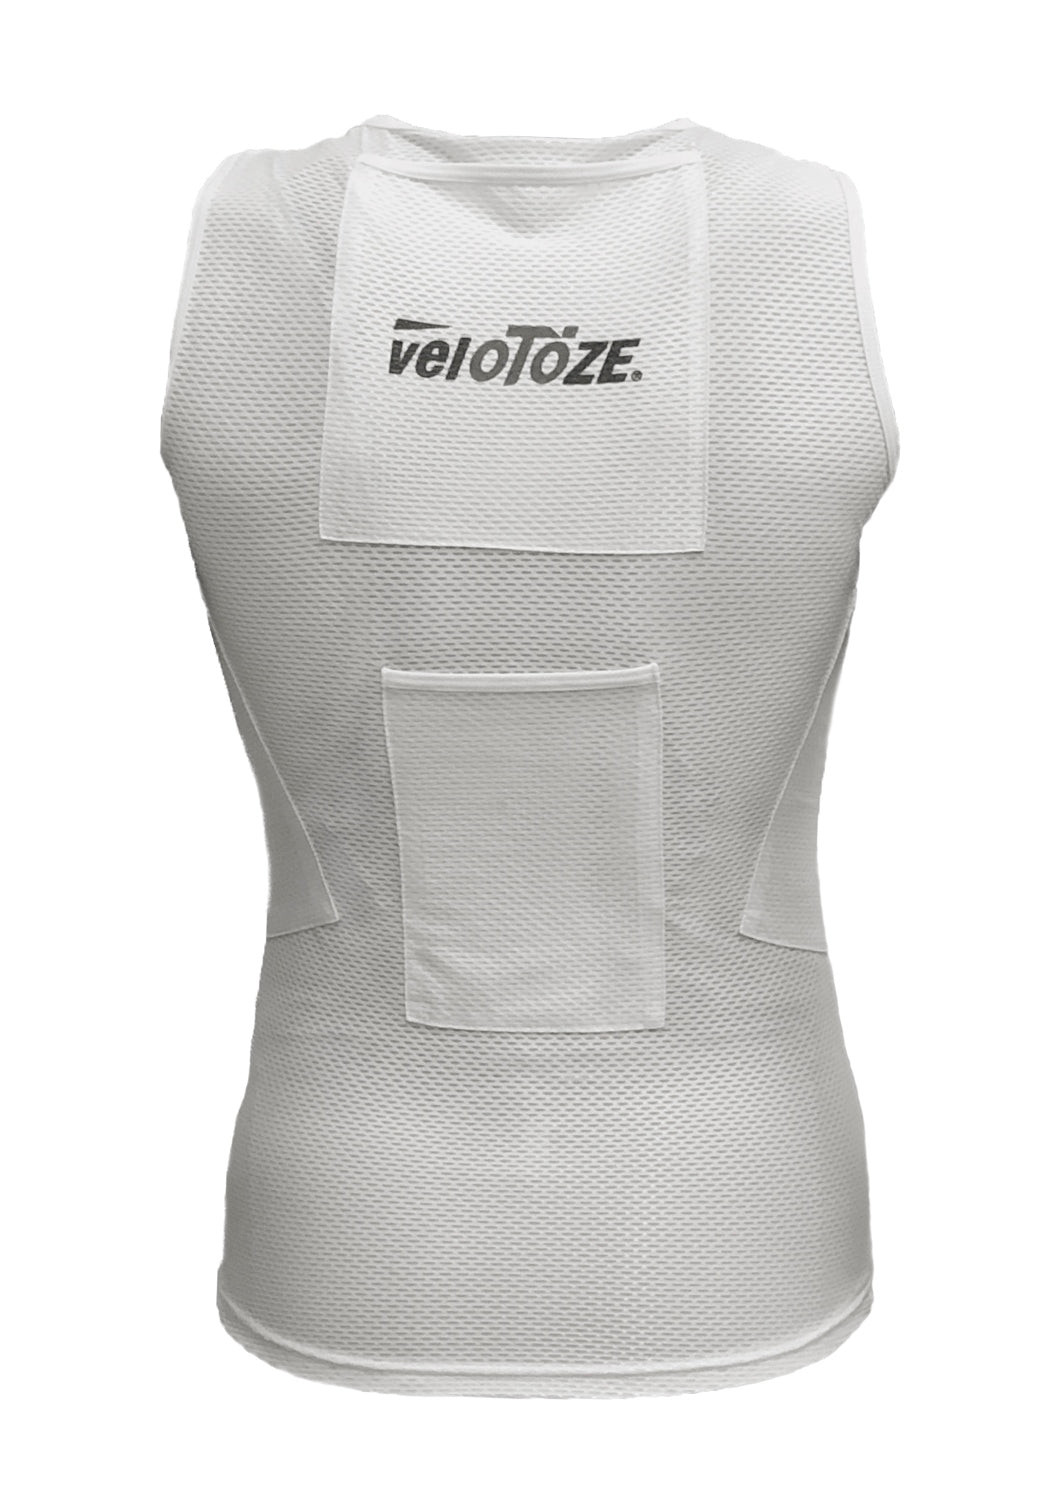 veloToze Cooling Vest with Cooling Packs